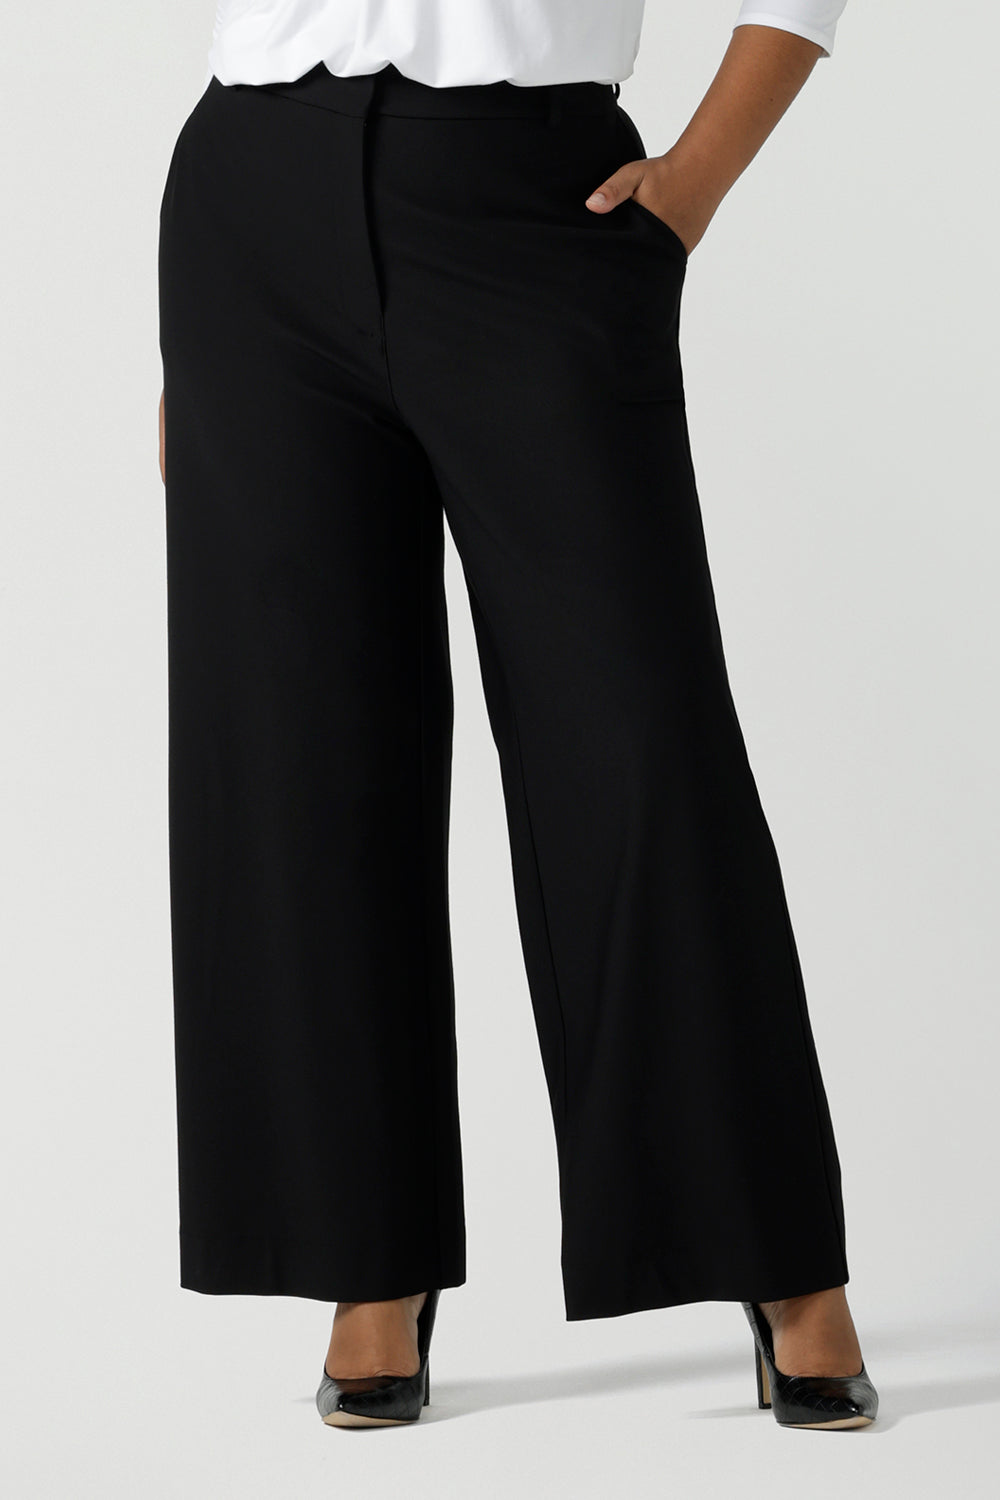 Close up of a size 16 woman wearing the Kade pant in black, a softly tailored black pant in ponte jersey. Functioning fly front, belt loops, side pockets and a straight let. Made in Australia for women size 8 - 14. 